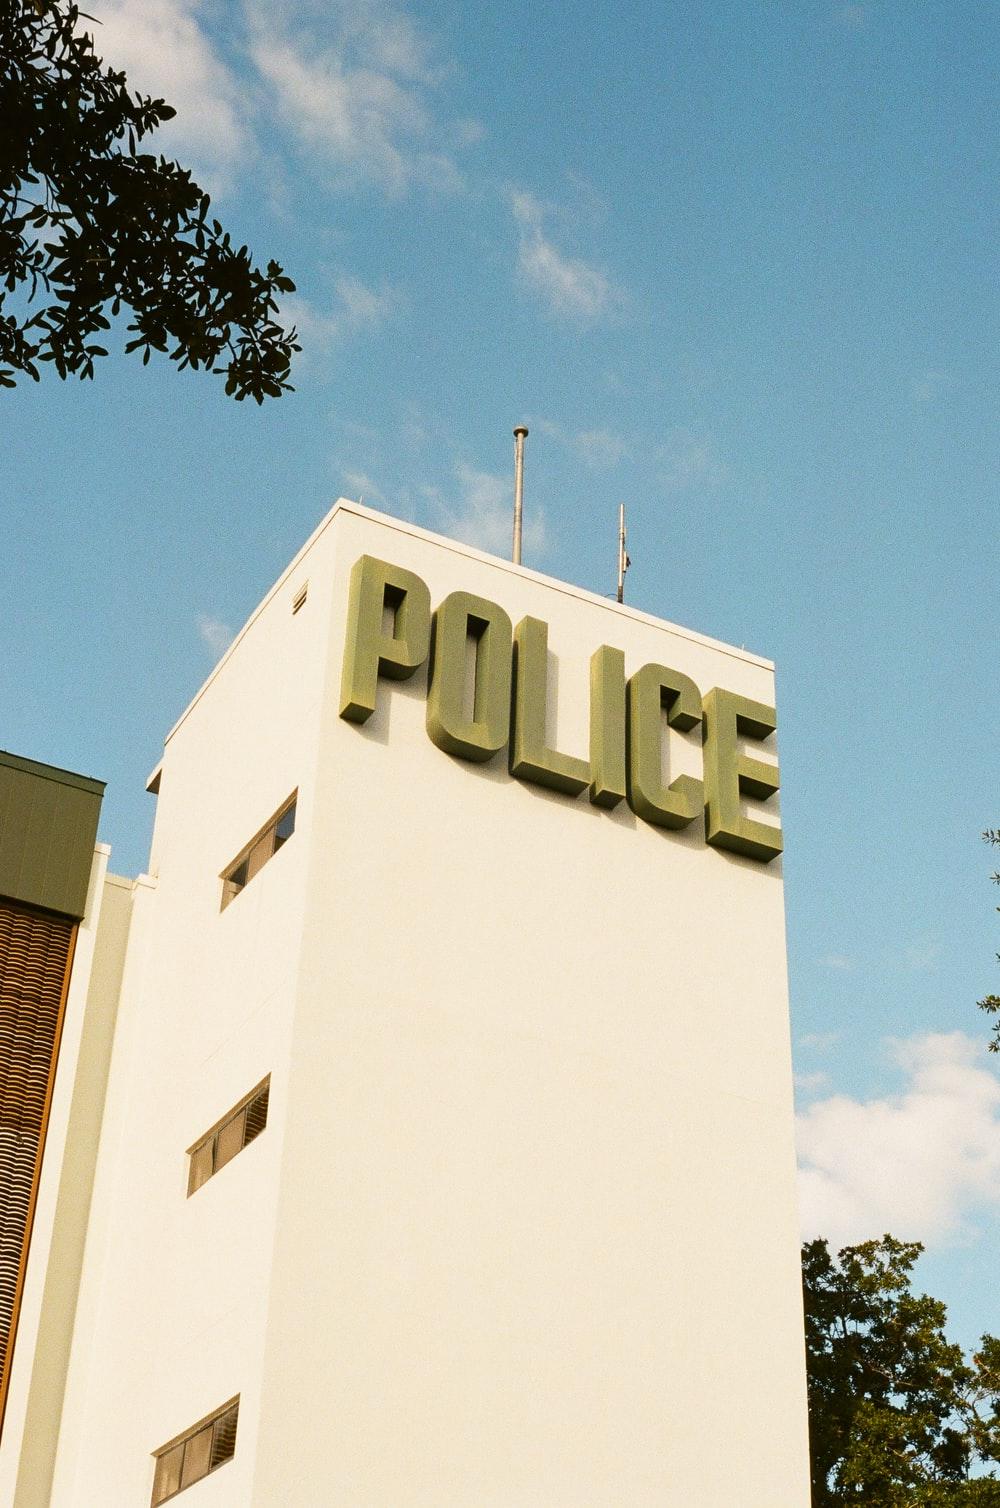 Police Station Background Images HD Pictures and Wallpaper For Free  Download  Pngtree